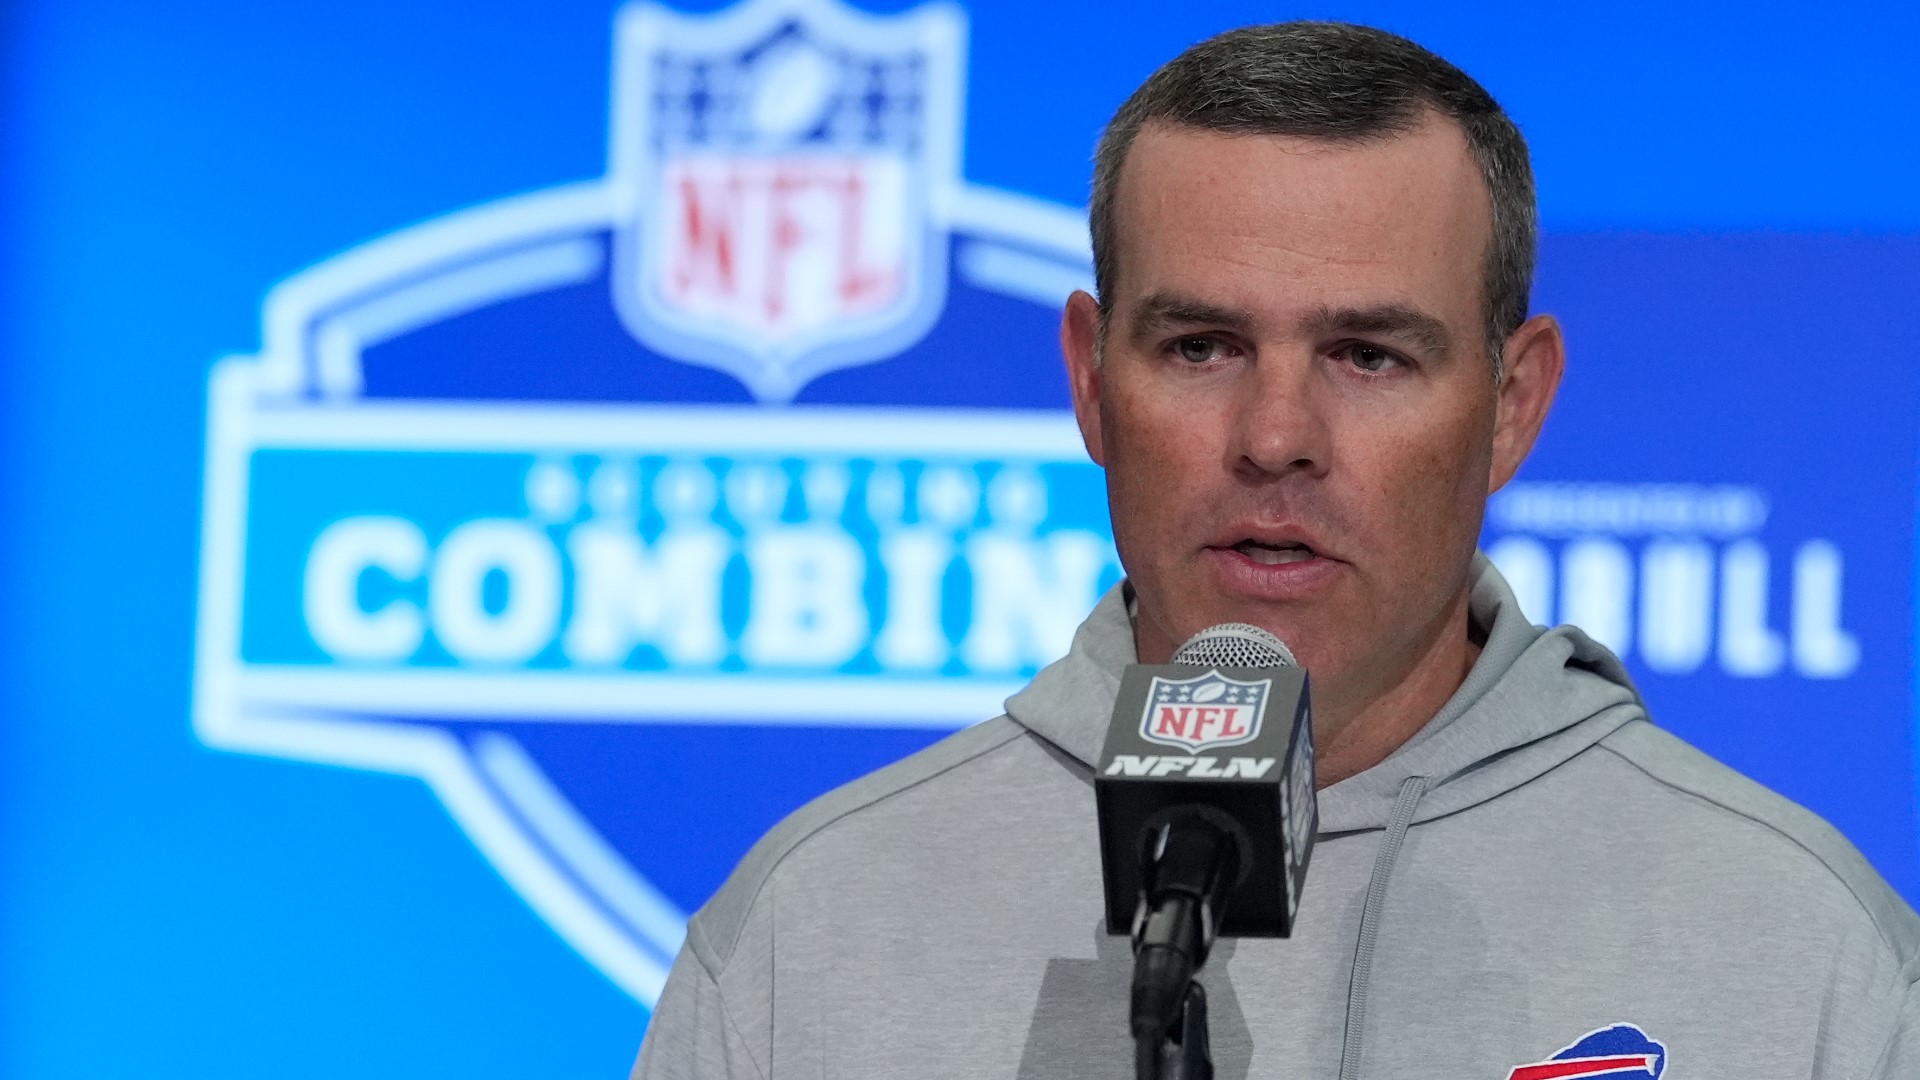 Buffalo Bills general manager Brandon Beane spoke during a news conference at the NFL Combine in Indianapolis on Feb. 27, 2024. (AP/Michael Conroy)